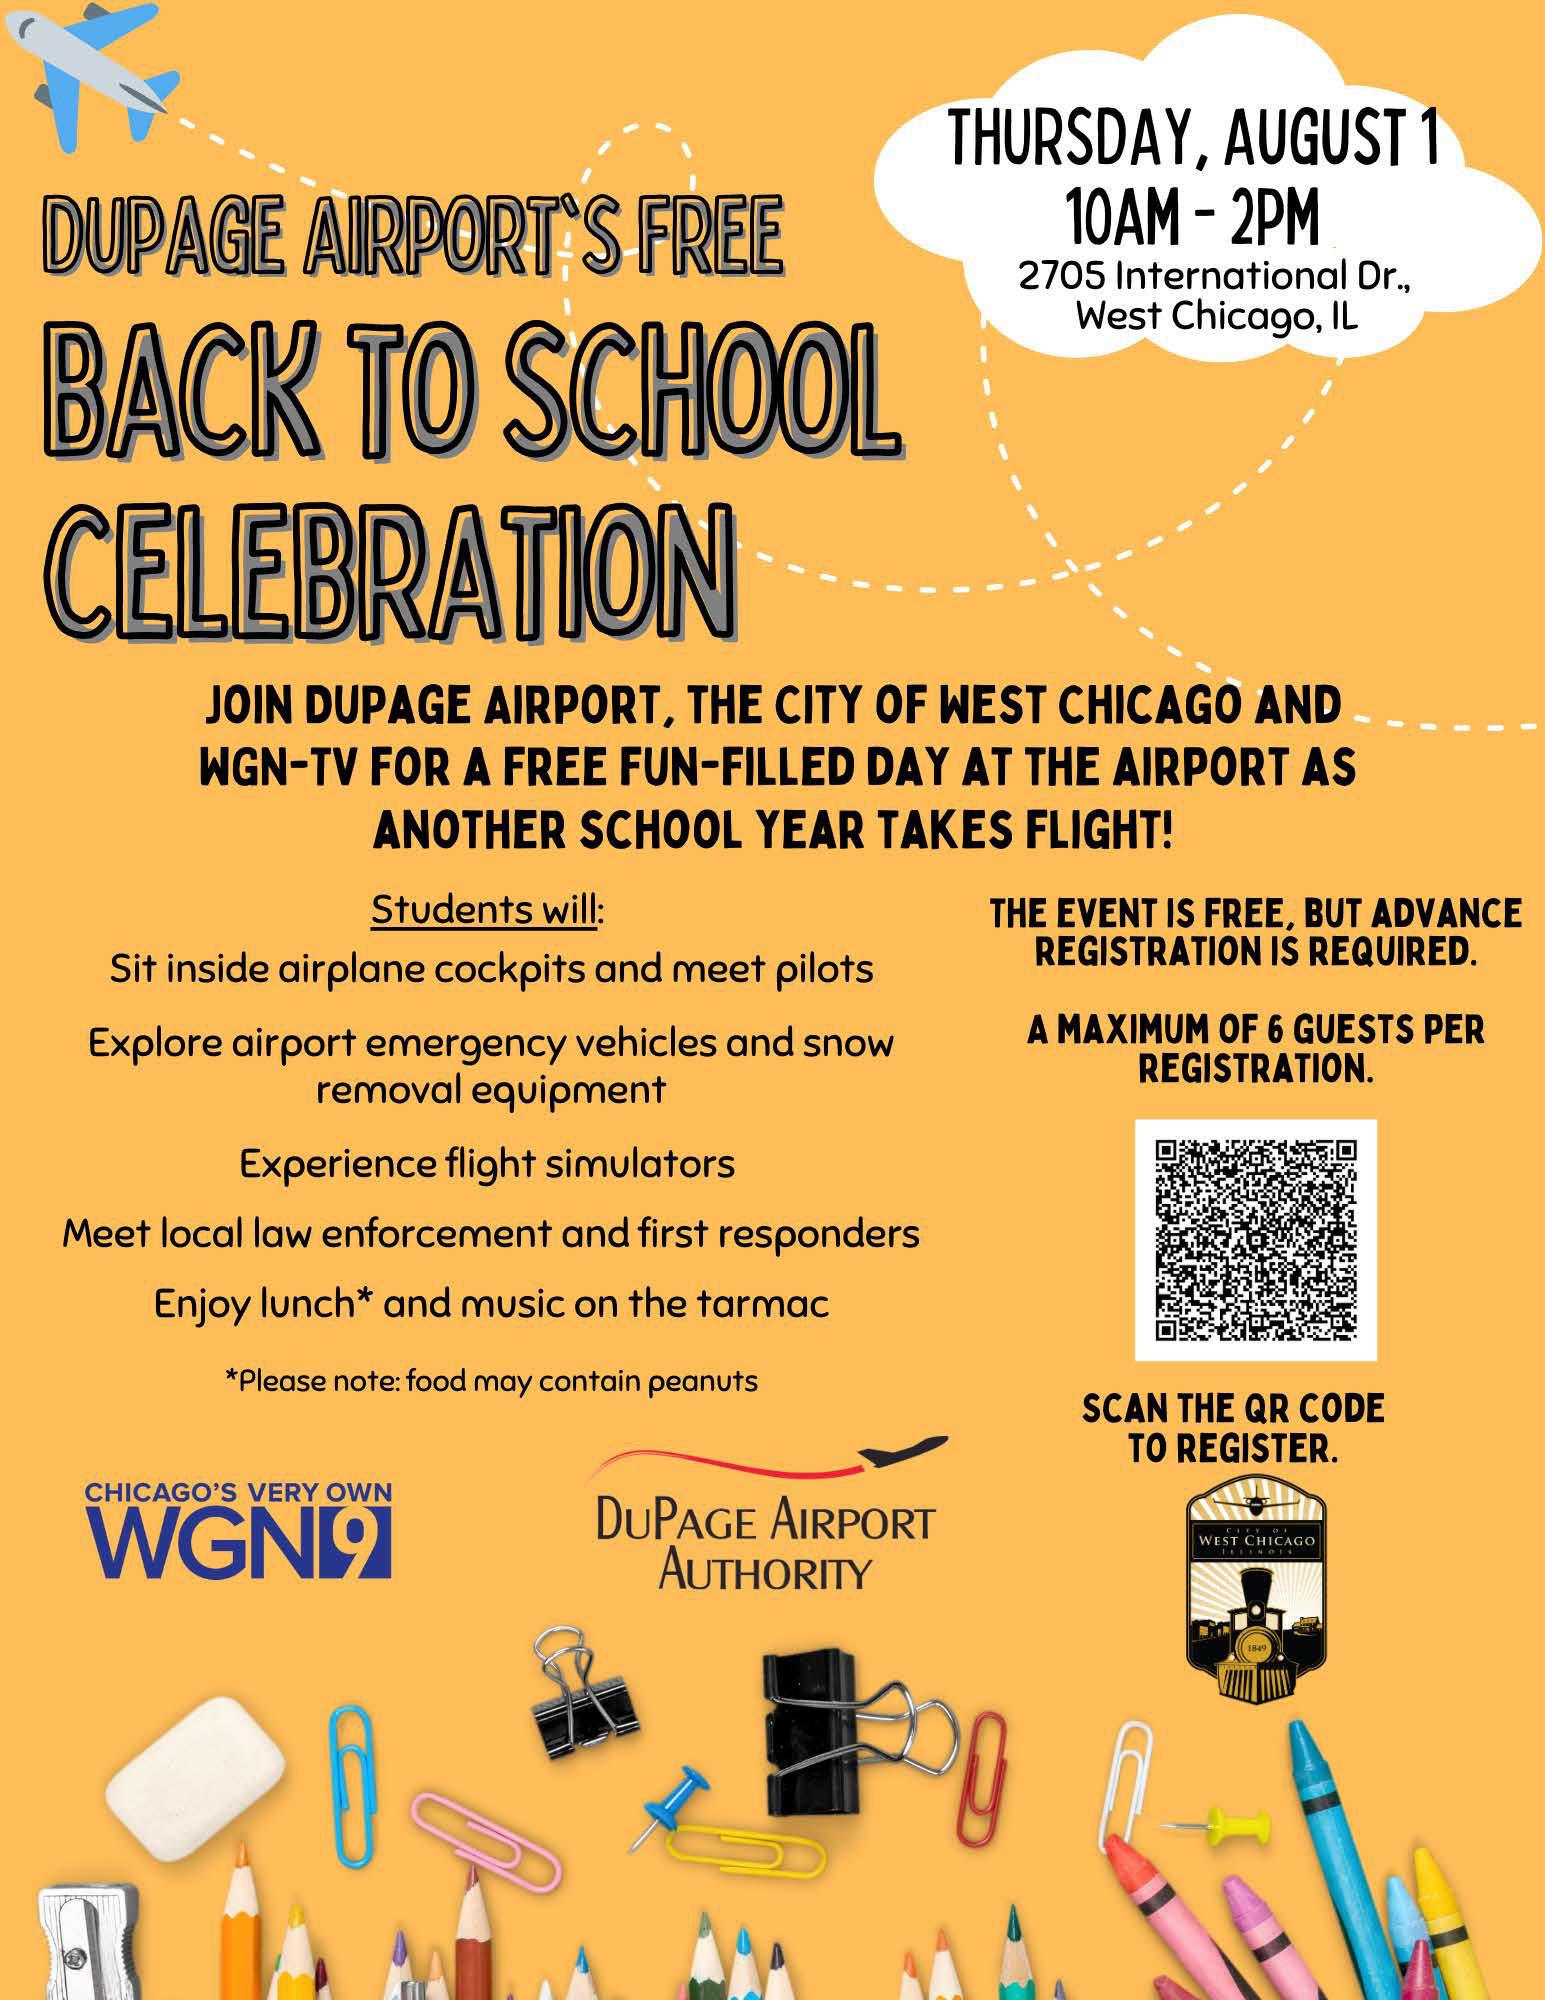 Enjoy a Back-to-School Celebration at DuPage Airport as another school year takes flight